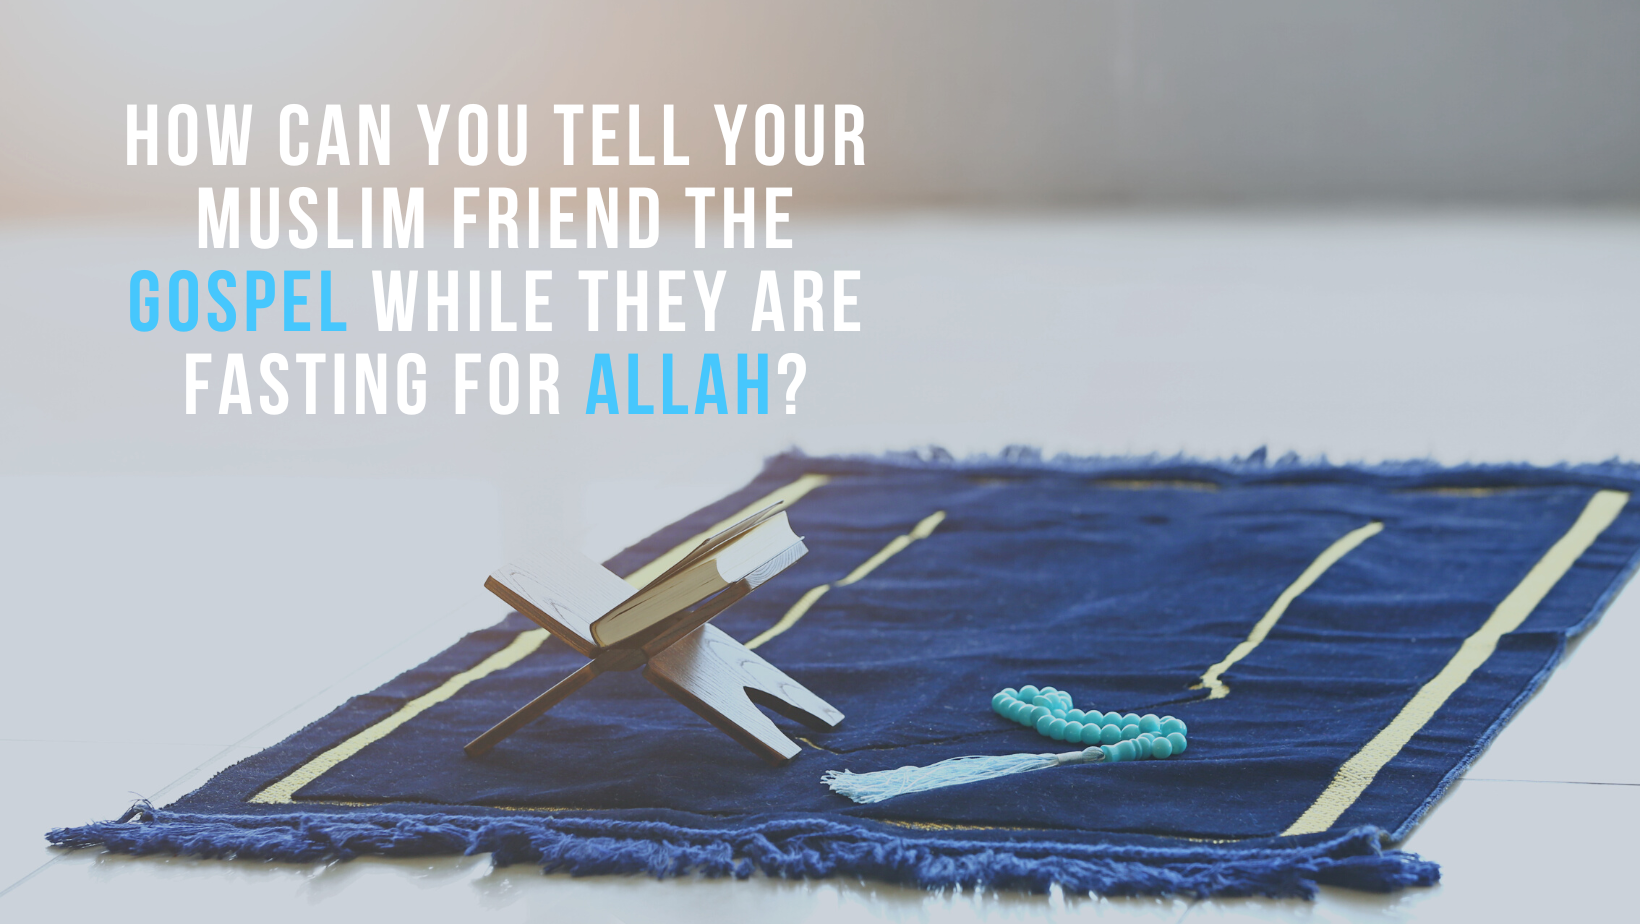 How can you tell your Muslim friend the Gospel while they are fasting for Allah?